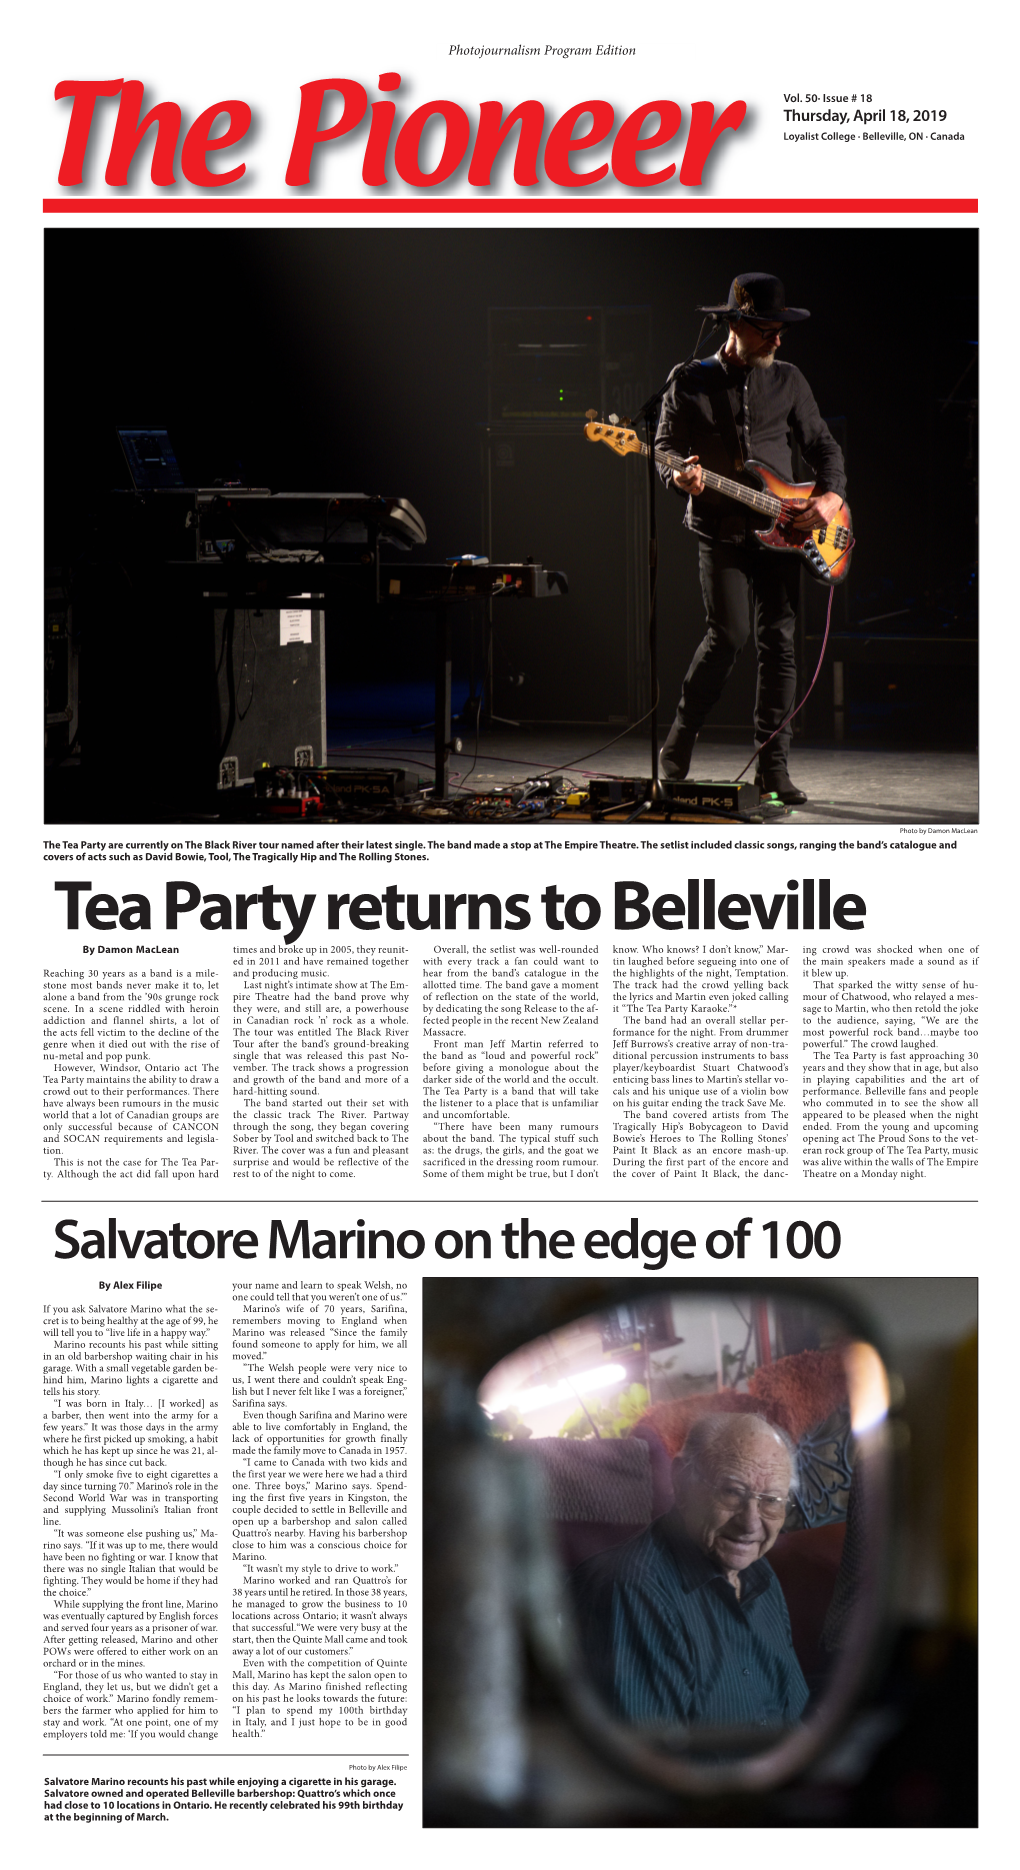 Tea Party Returns to Belleville by Damon Maclean Times and Broke up in 2005, They Reunit- Overall, the Setlist Was Well-Rounded Know